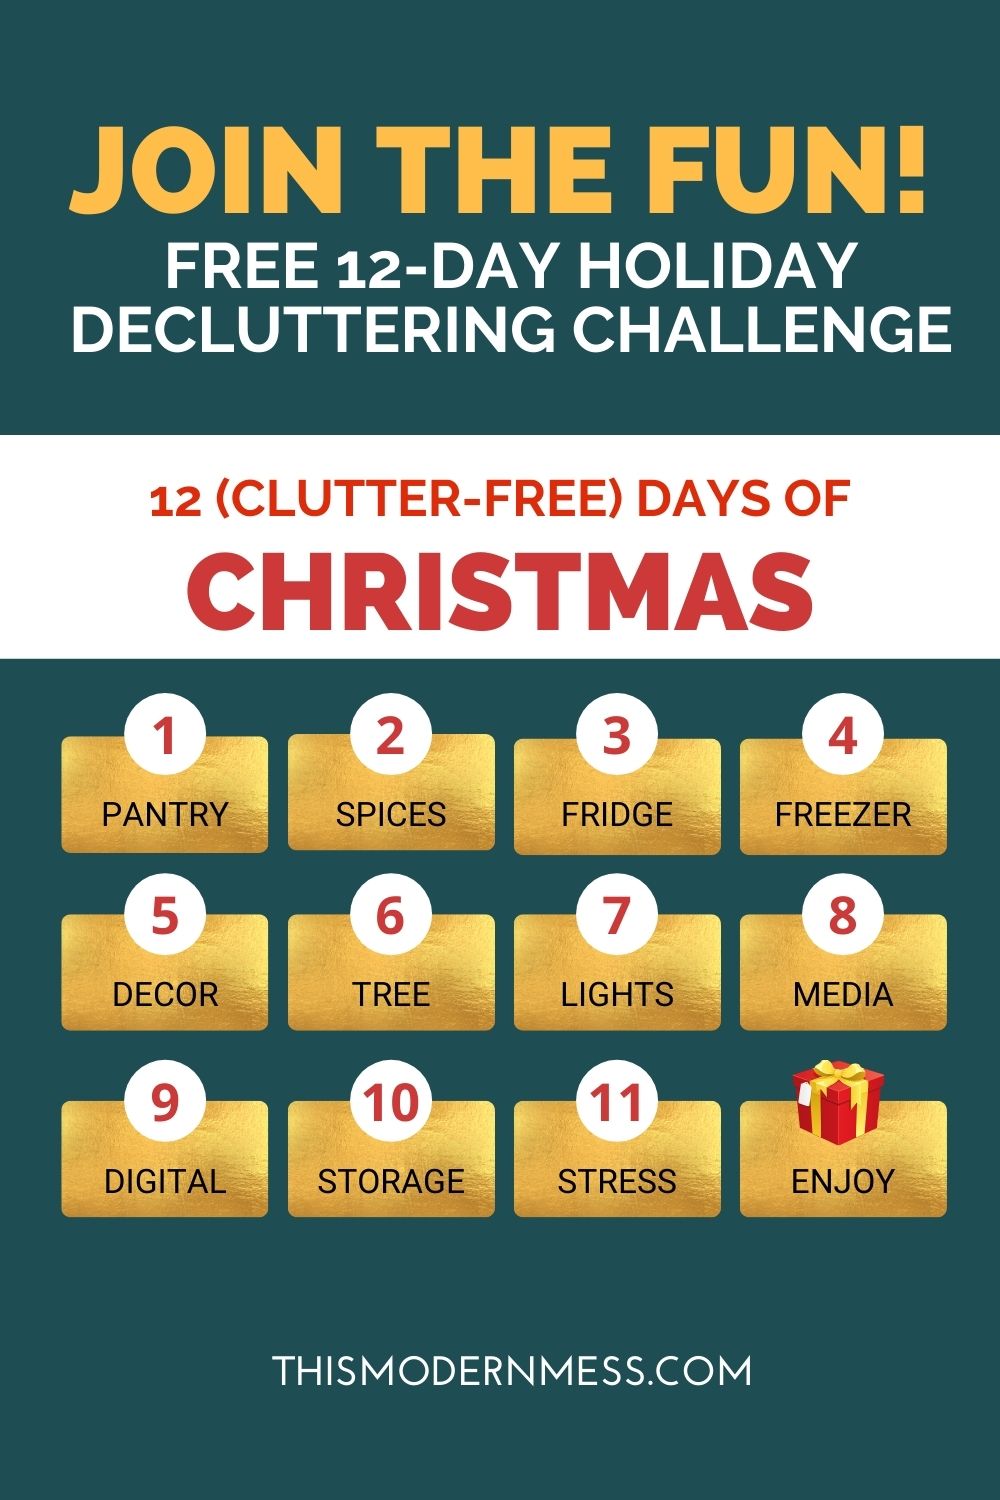 Declutter your holiday with this free 12-Day challenge